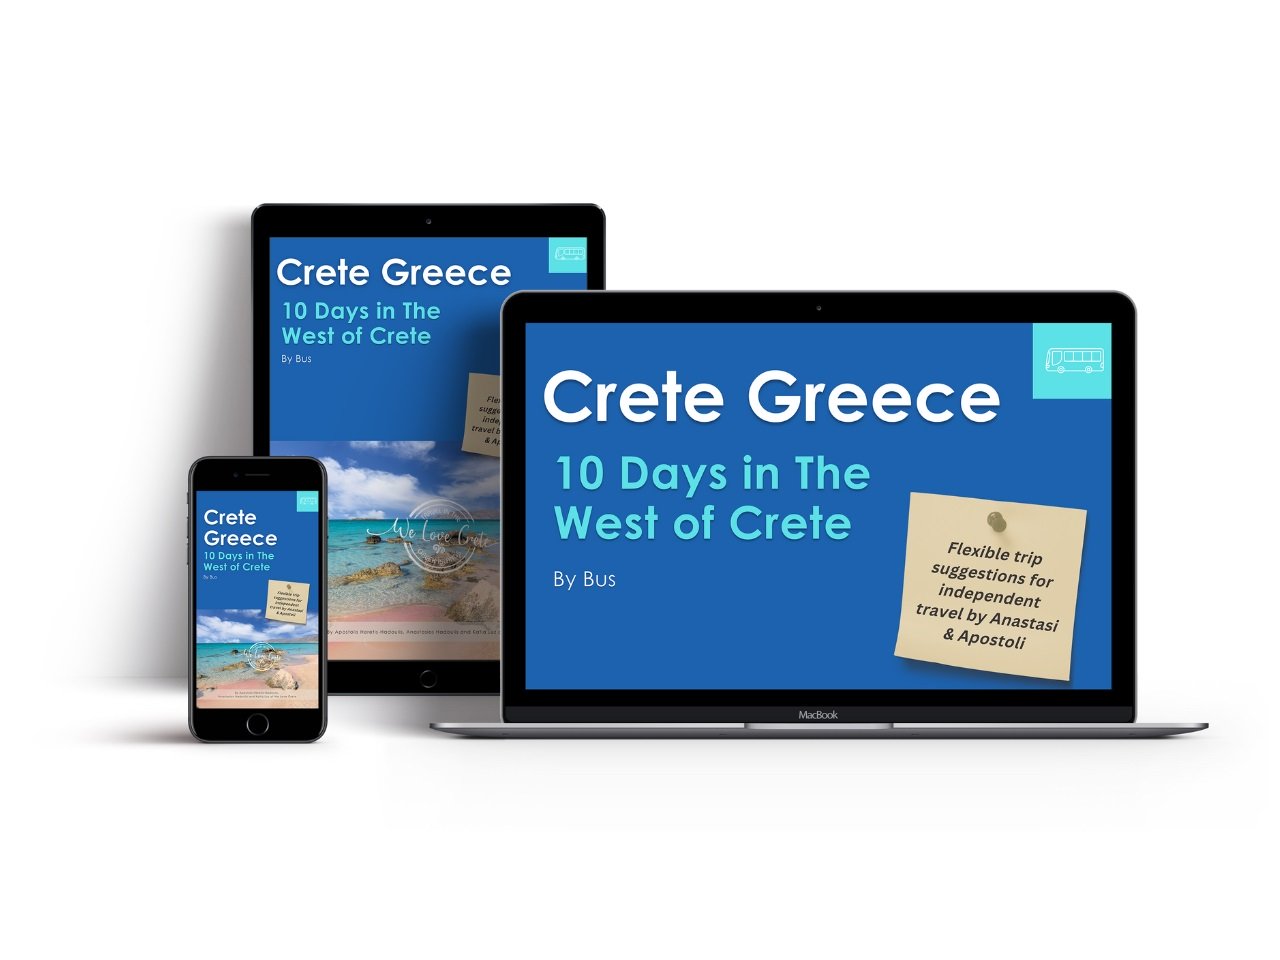 Our e-book Five Days in the East of Crete.